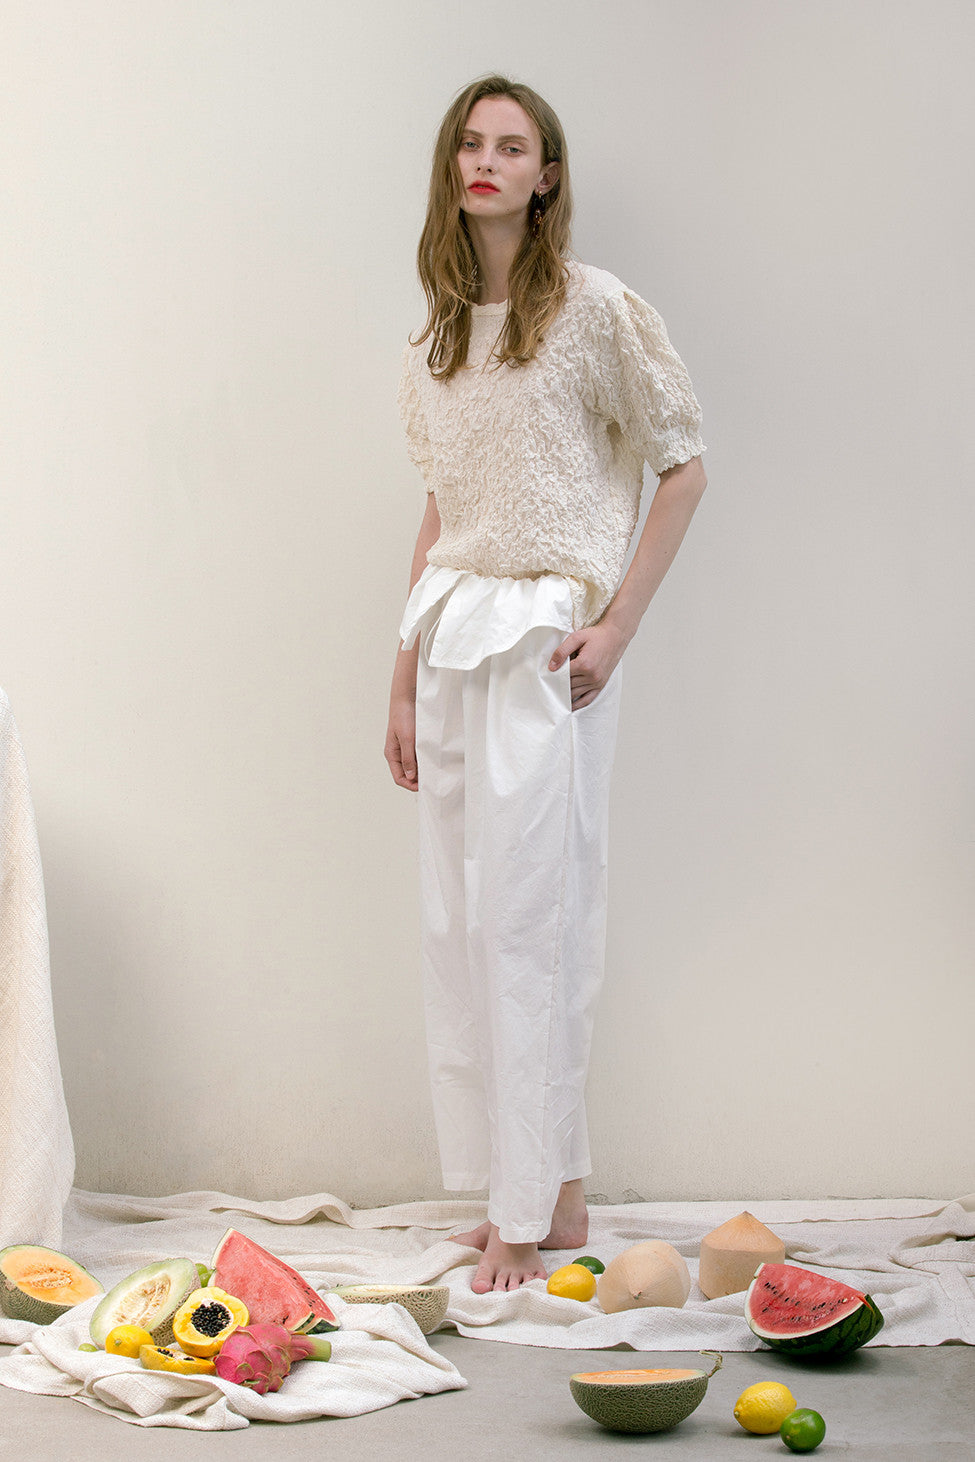 The Lassie Pant in white featuring elastic waistband, two slant pockets. Lightweight.